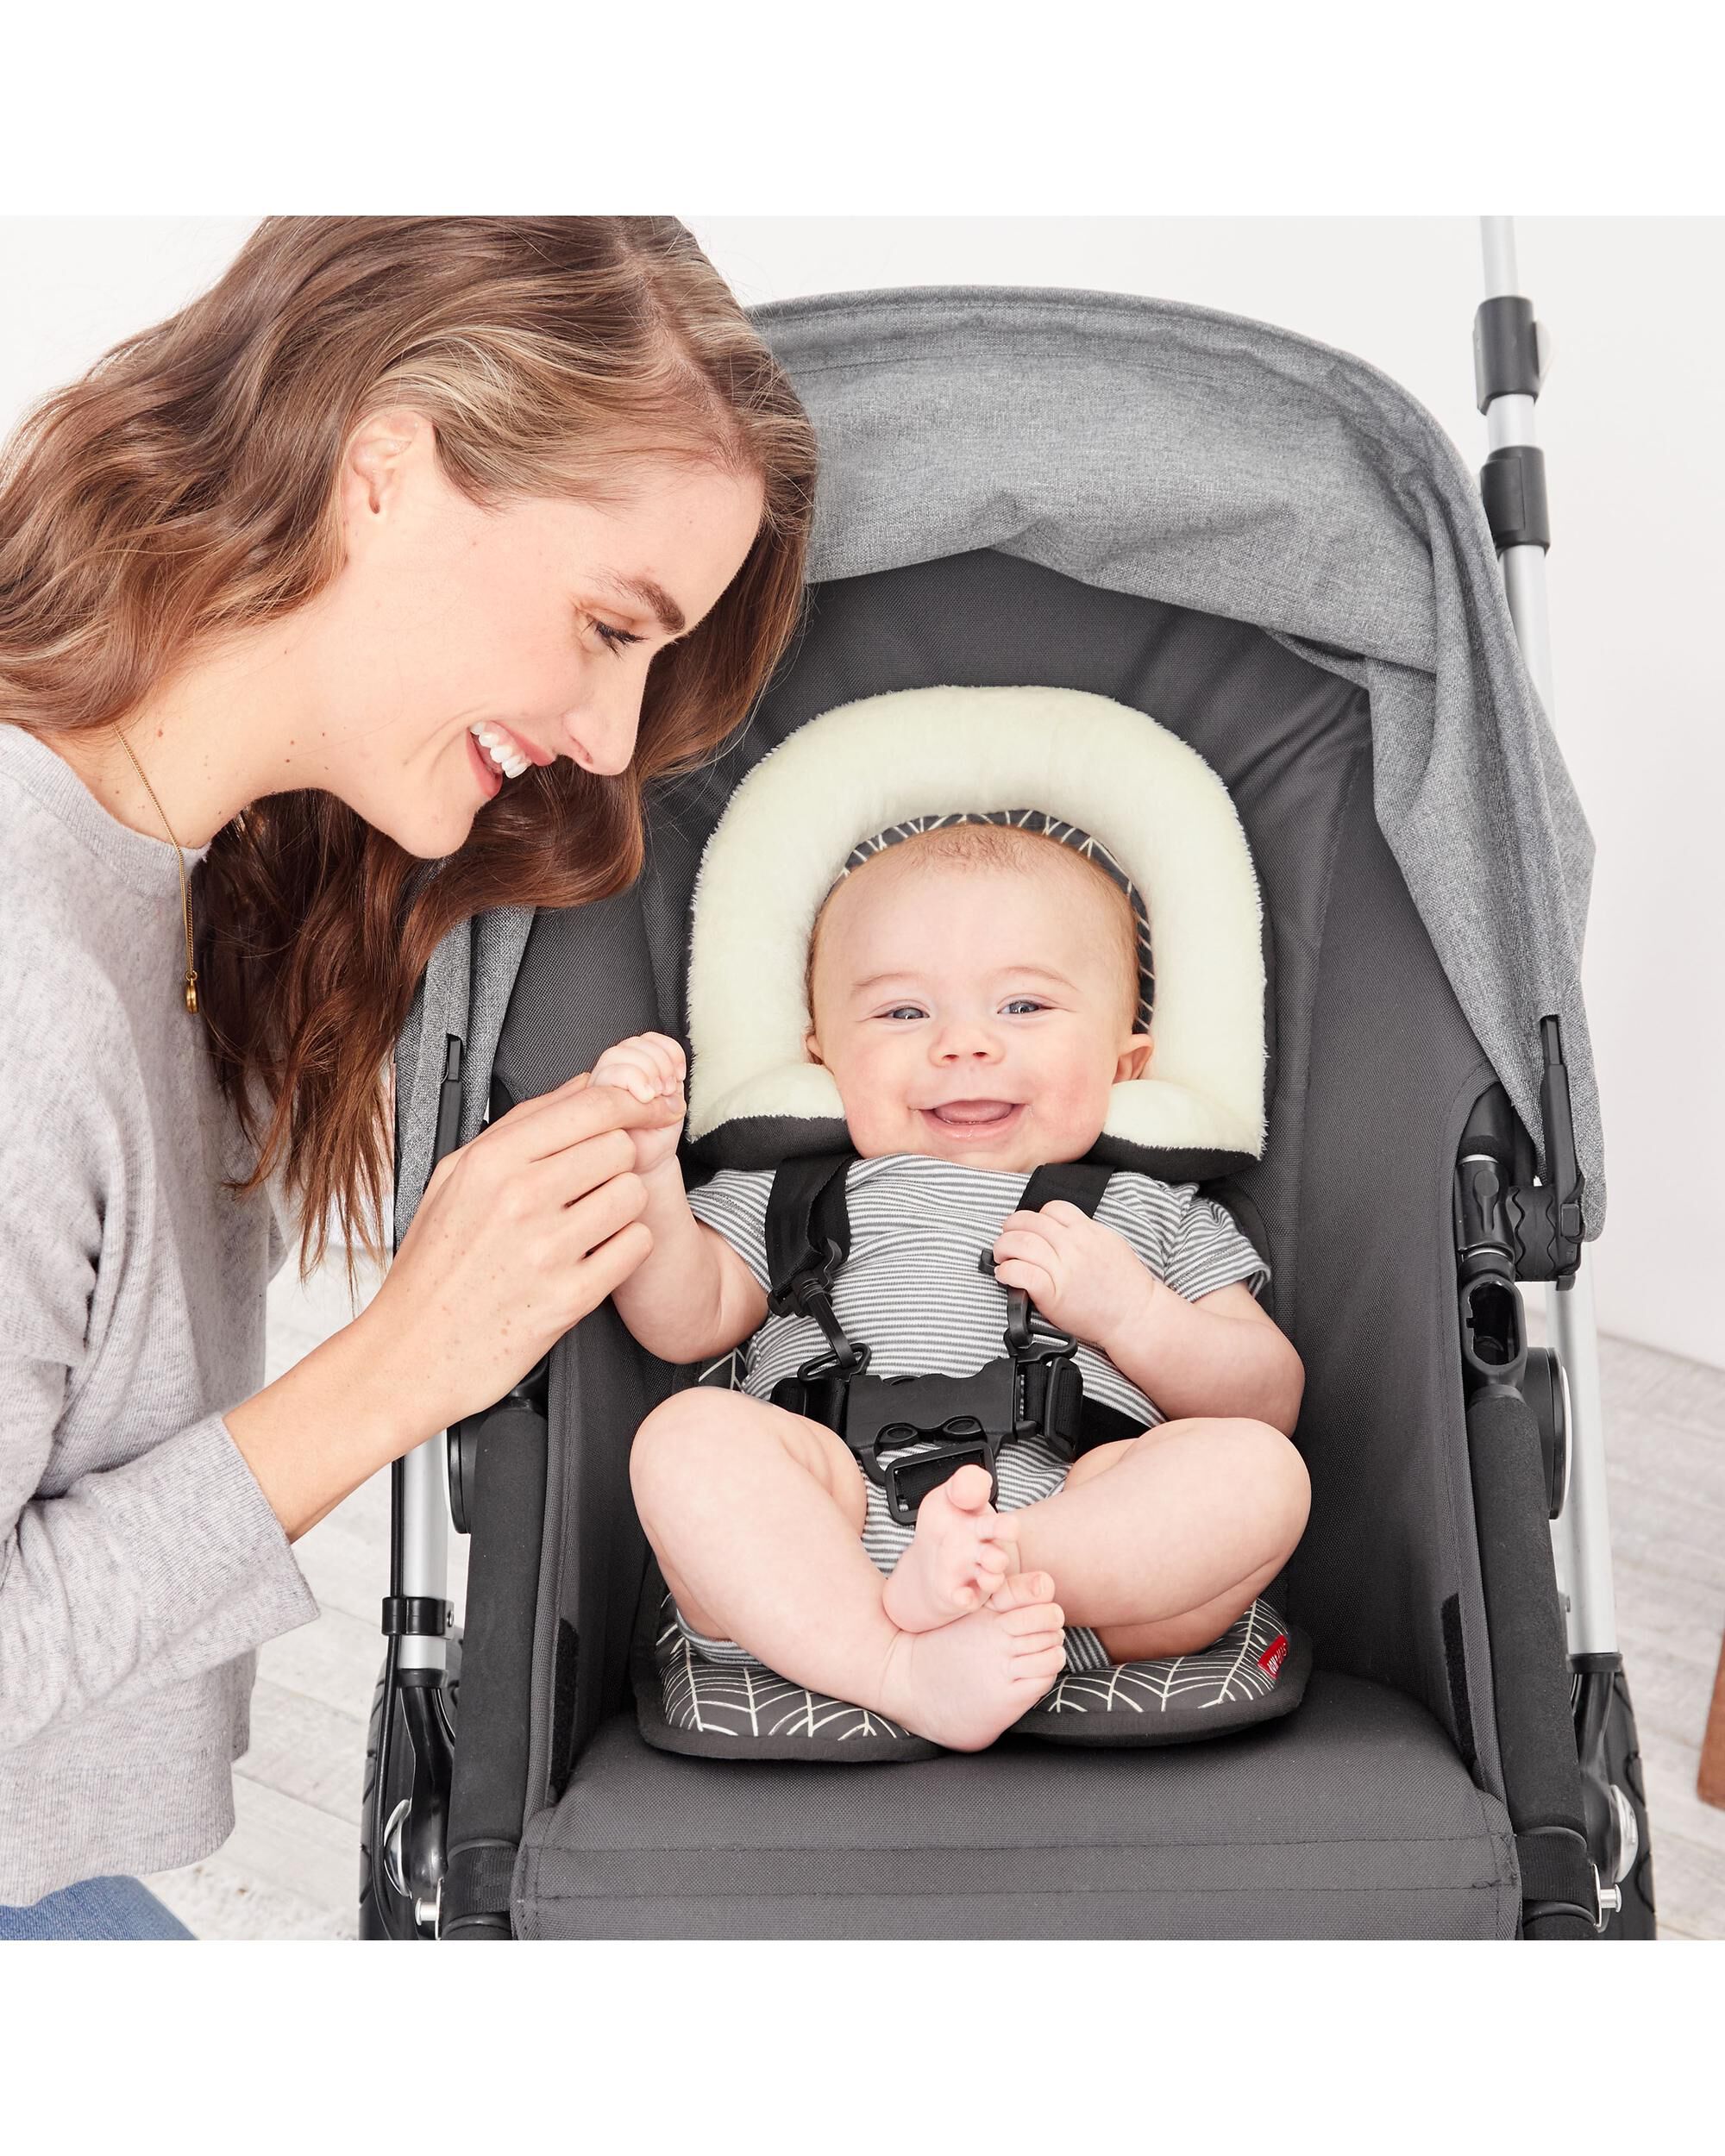 skip hop cool touch infant support